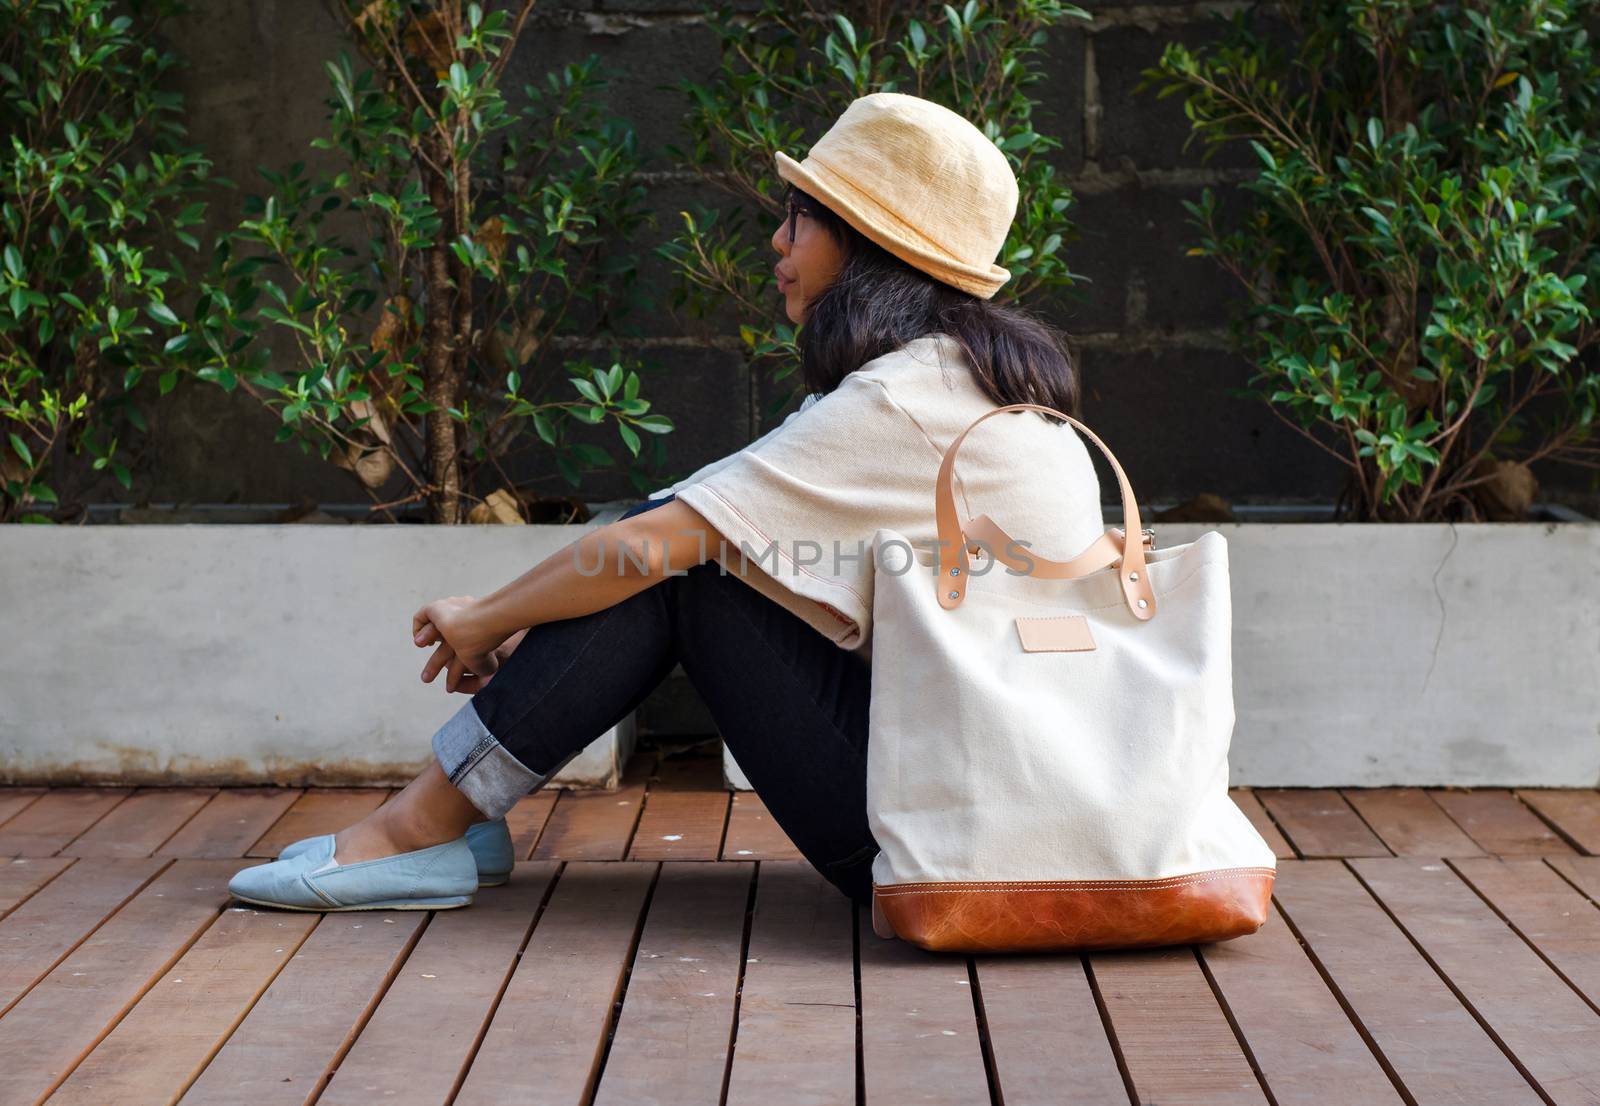 Young fashion woman with a canvas bag, Outdoor portrait